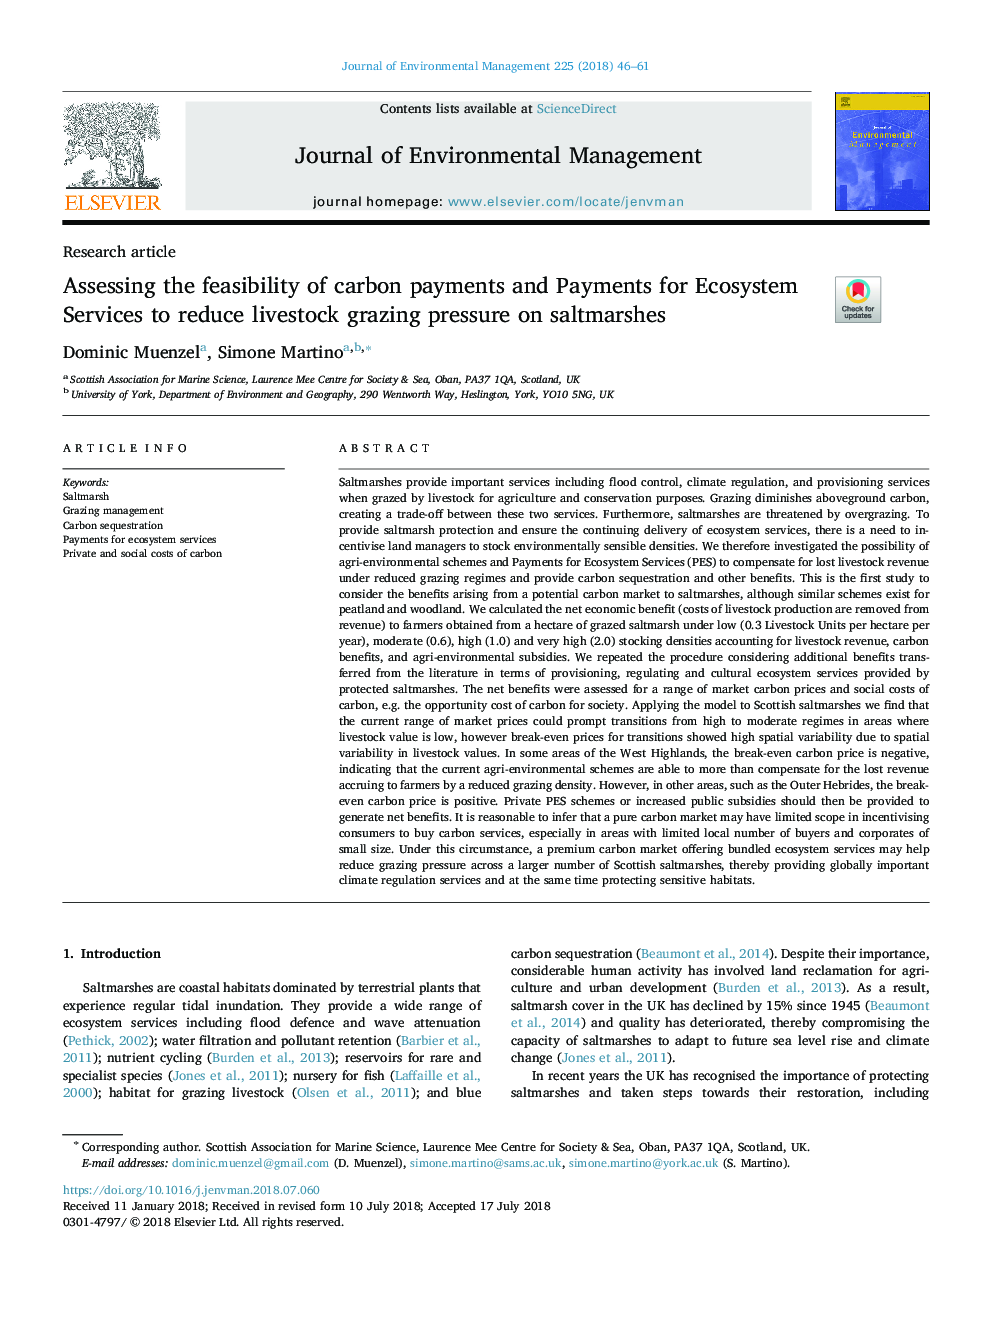 Assessing the feasibility of carbon payments and Payments for Ecosystem Services to reduce livestock grazing pressure on saltmarshes